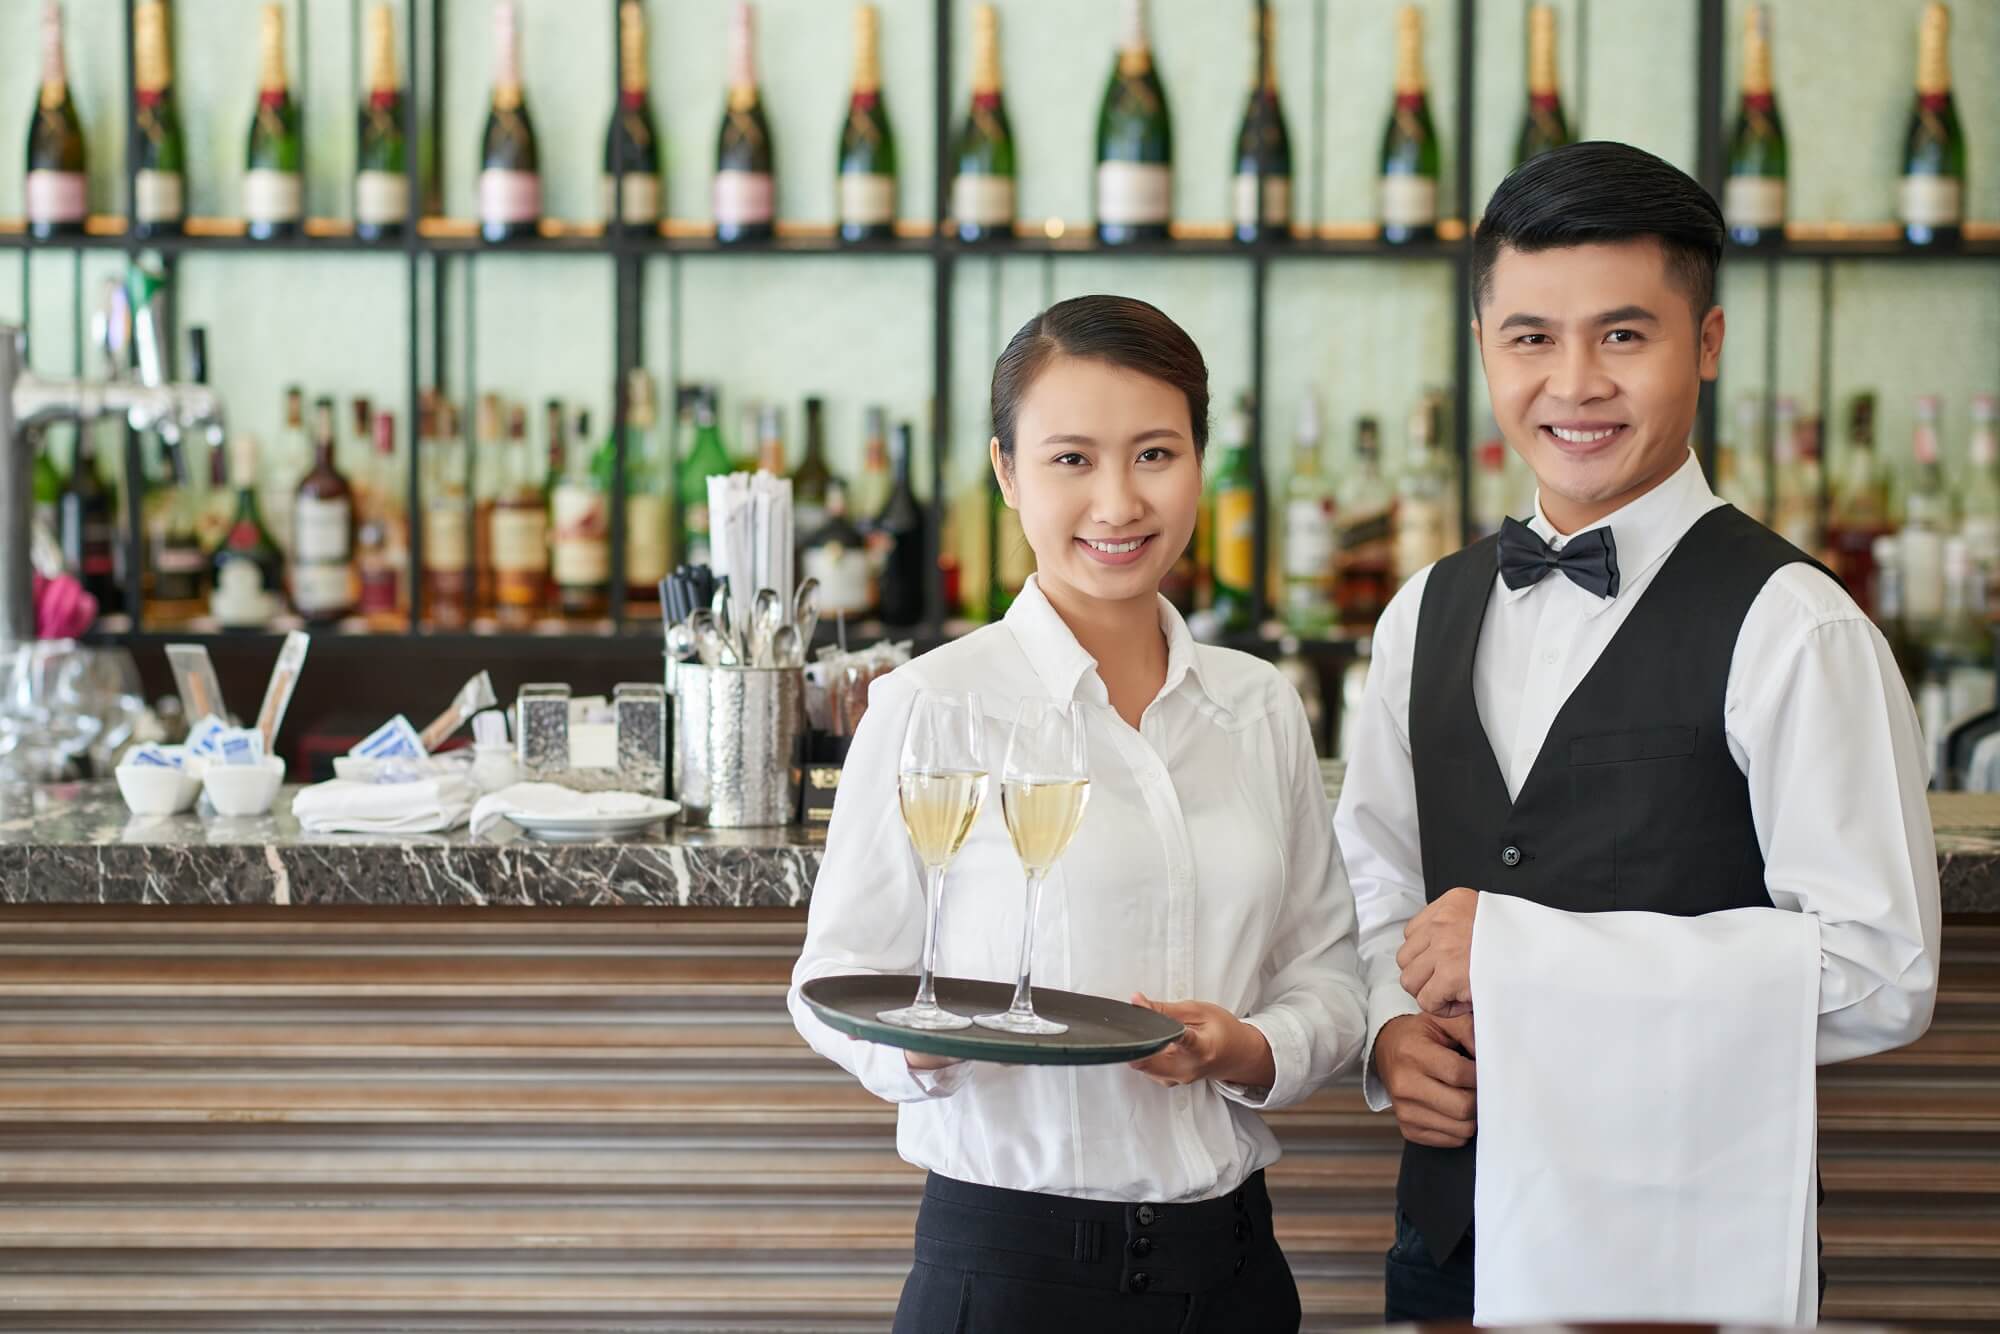 Smiling waiter and waitress with drinks and towel